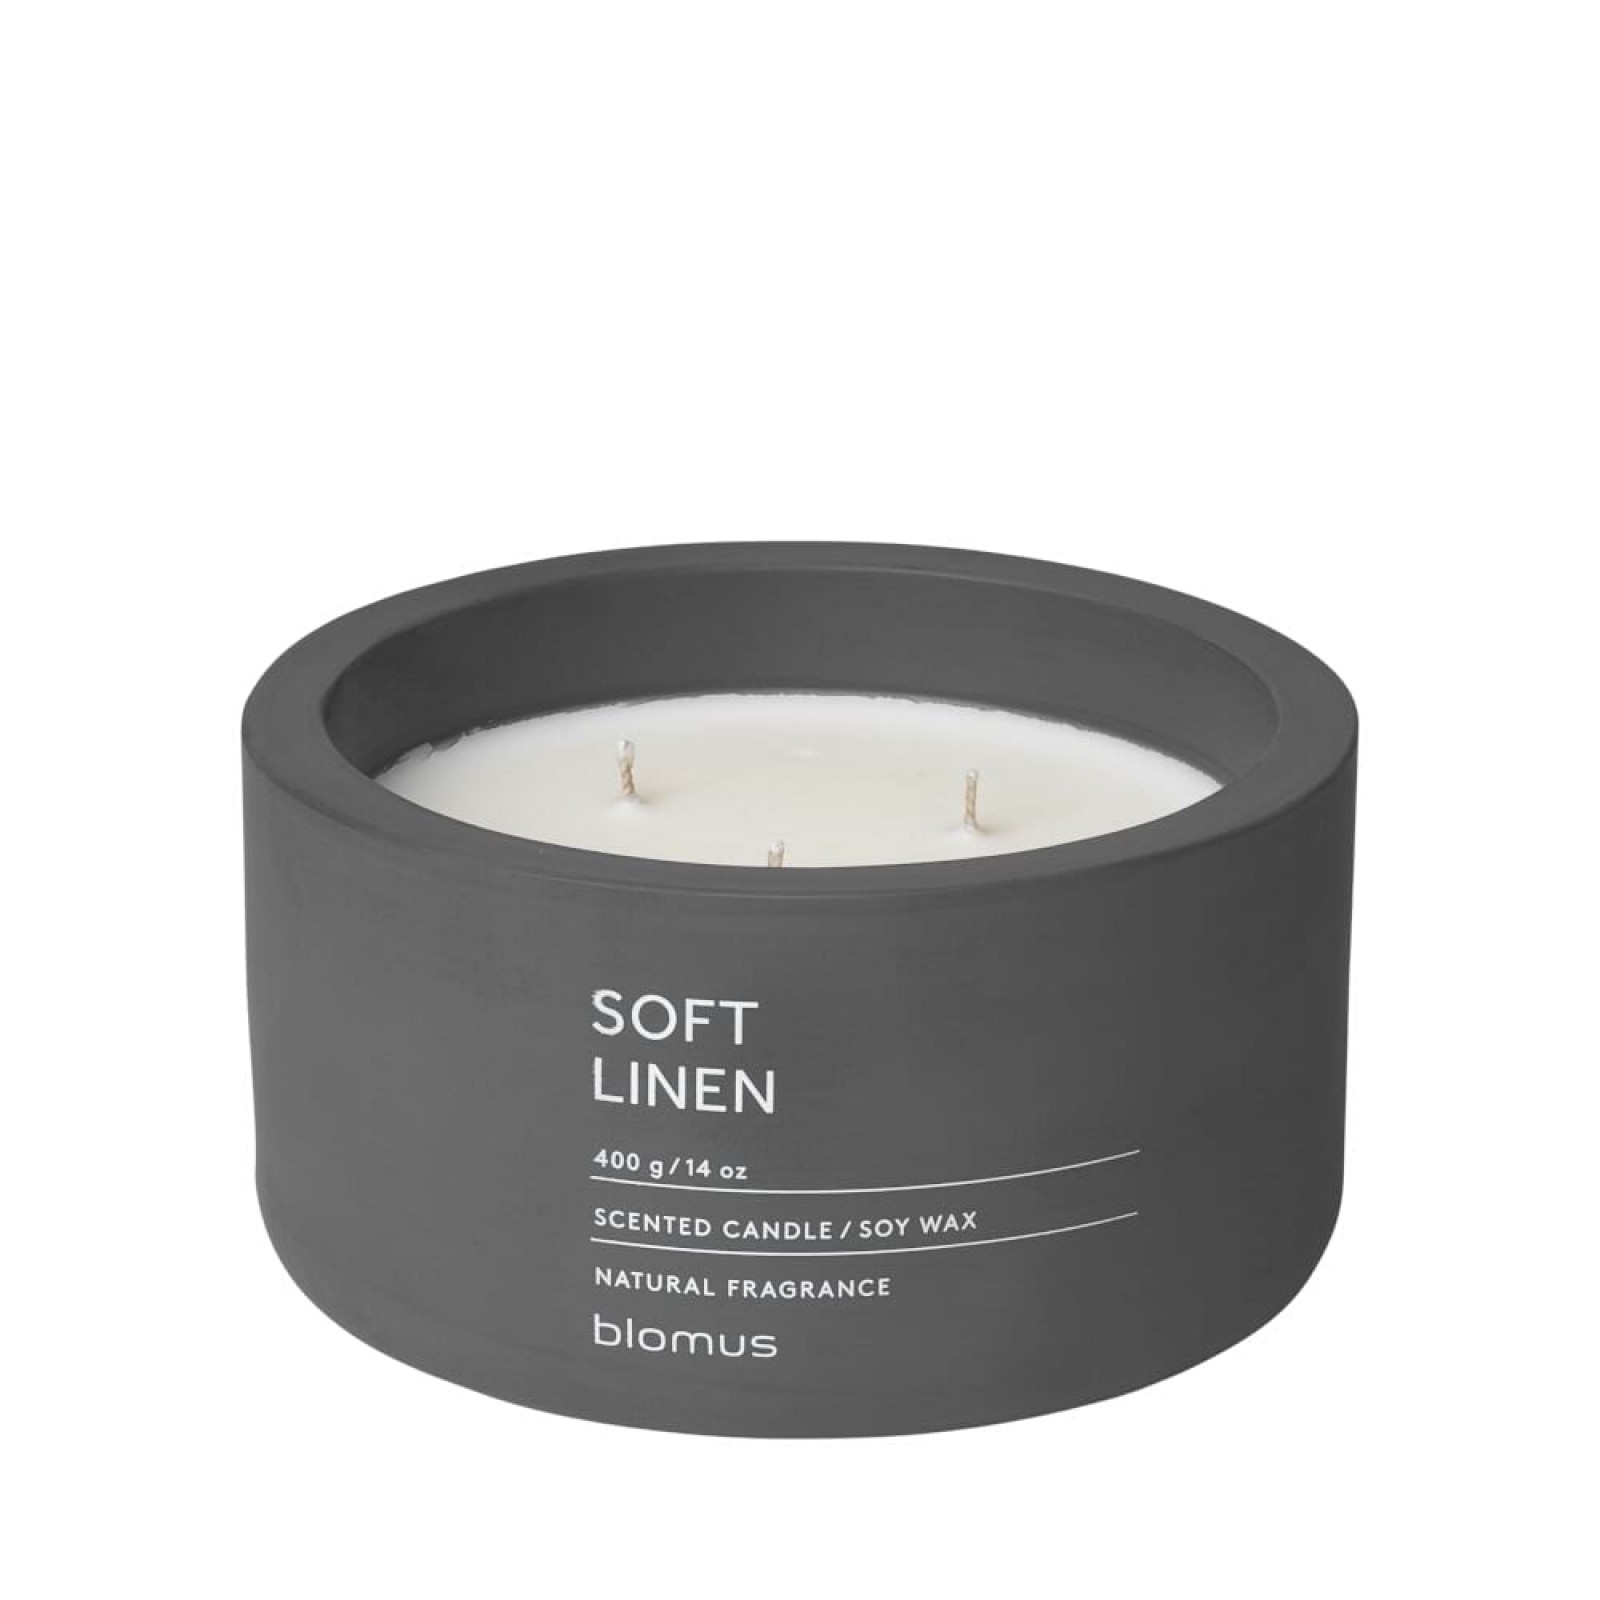 Scented Candle FRAGA XL Soft Linen - Blomus